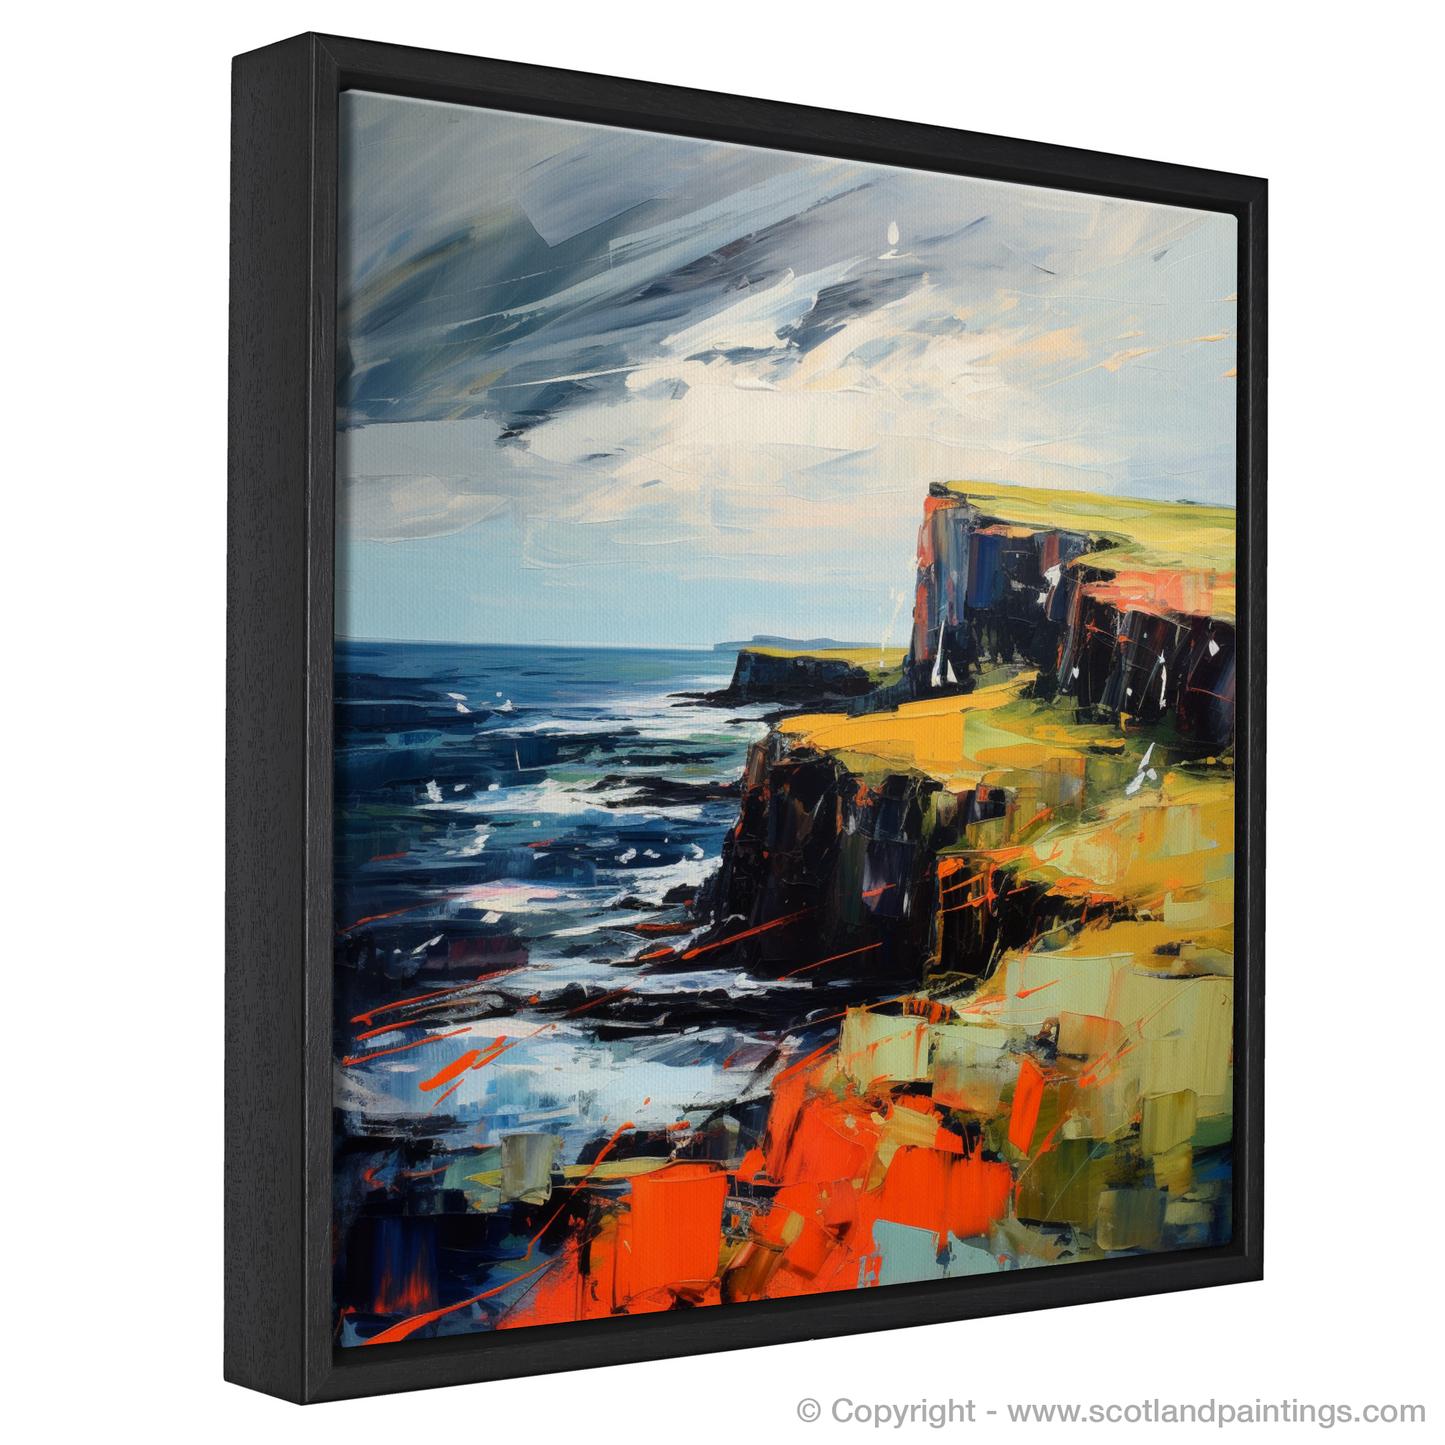 Painting and Art Print of Orkney, North of mainland Scotland entitled "Orkney's Wild Symphony".